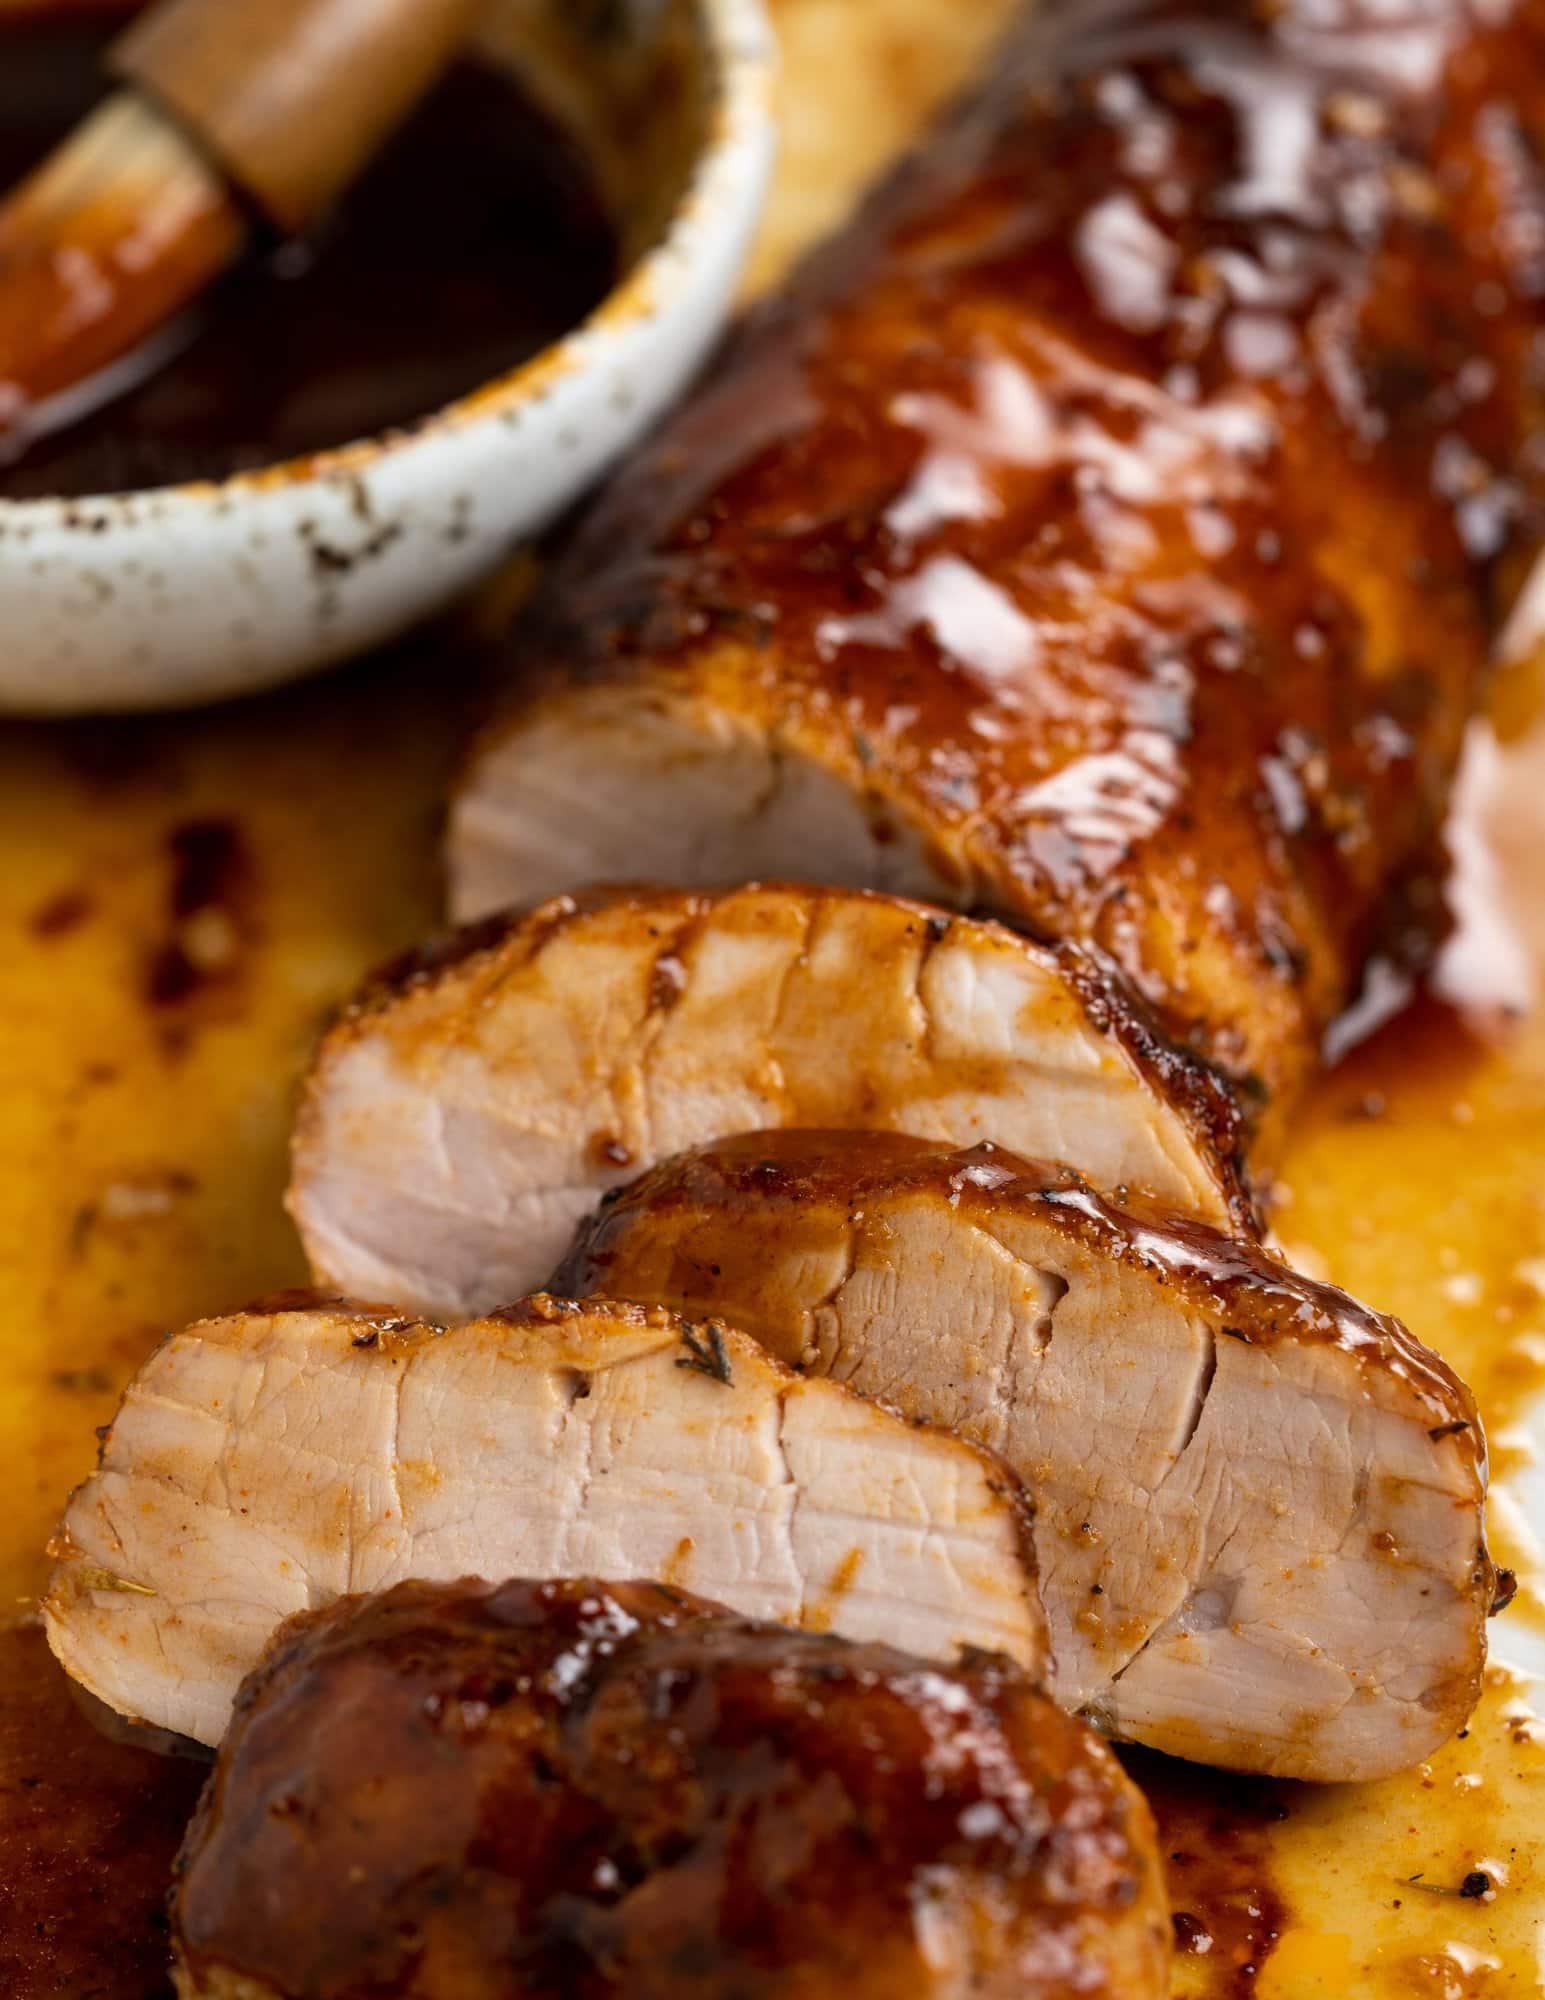 A shiny BBQ glaze on baked pork tenderloin and chopped cuts show light pink color.